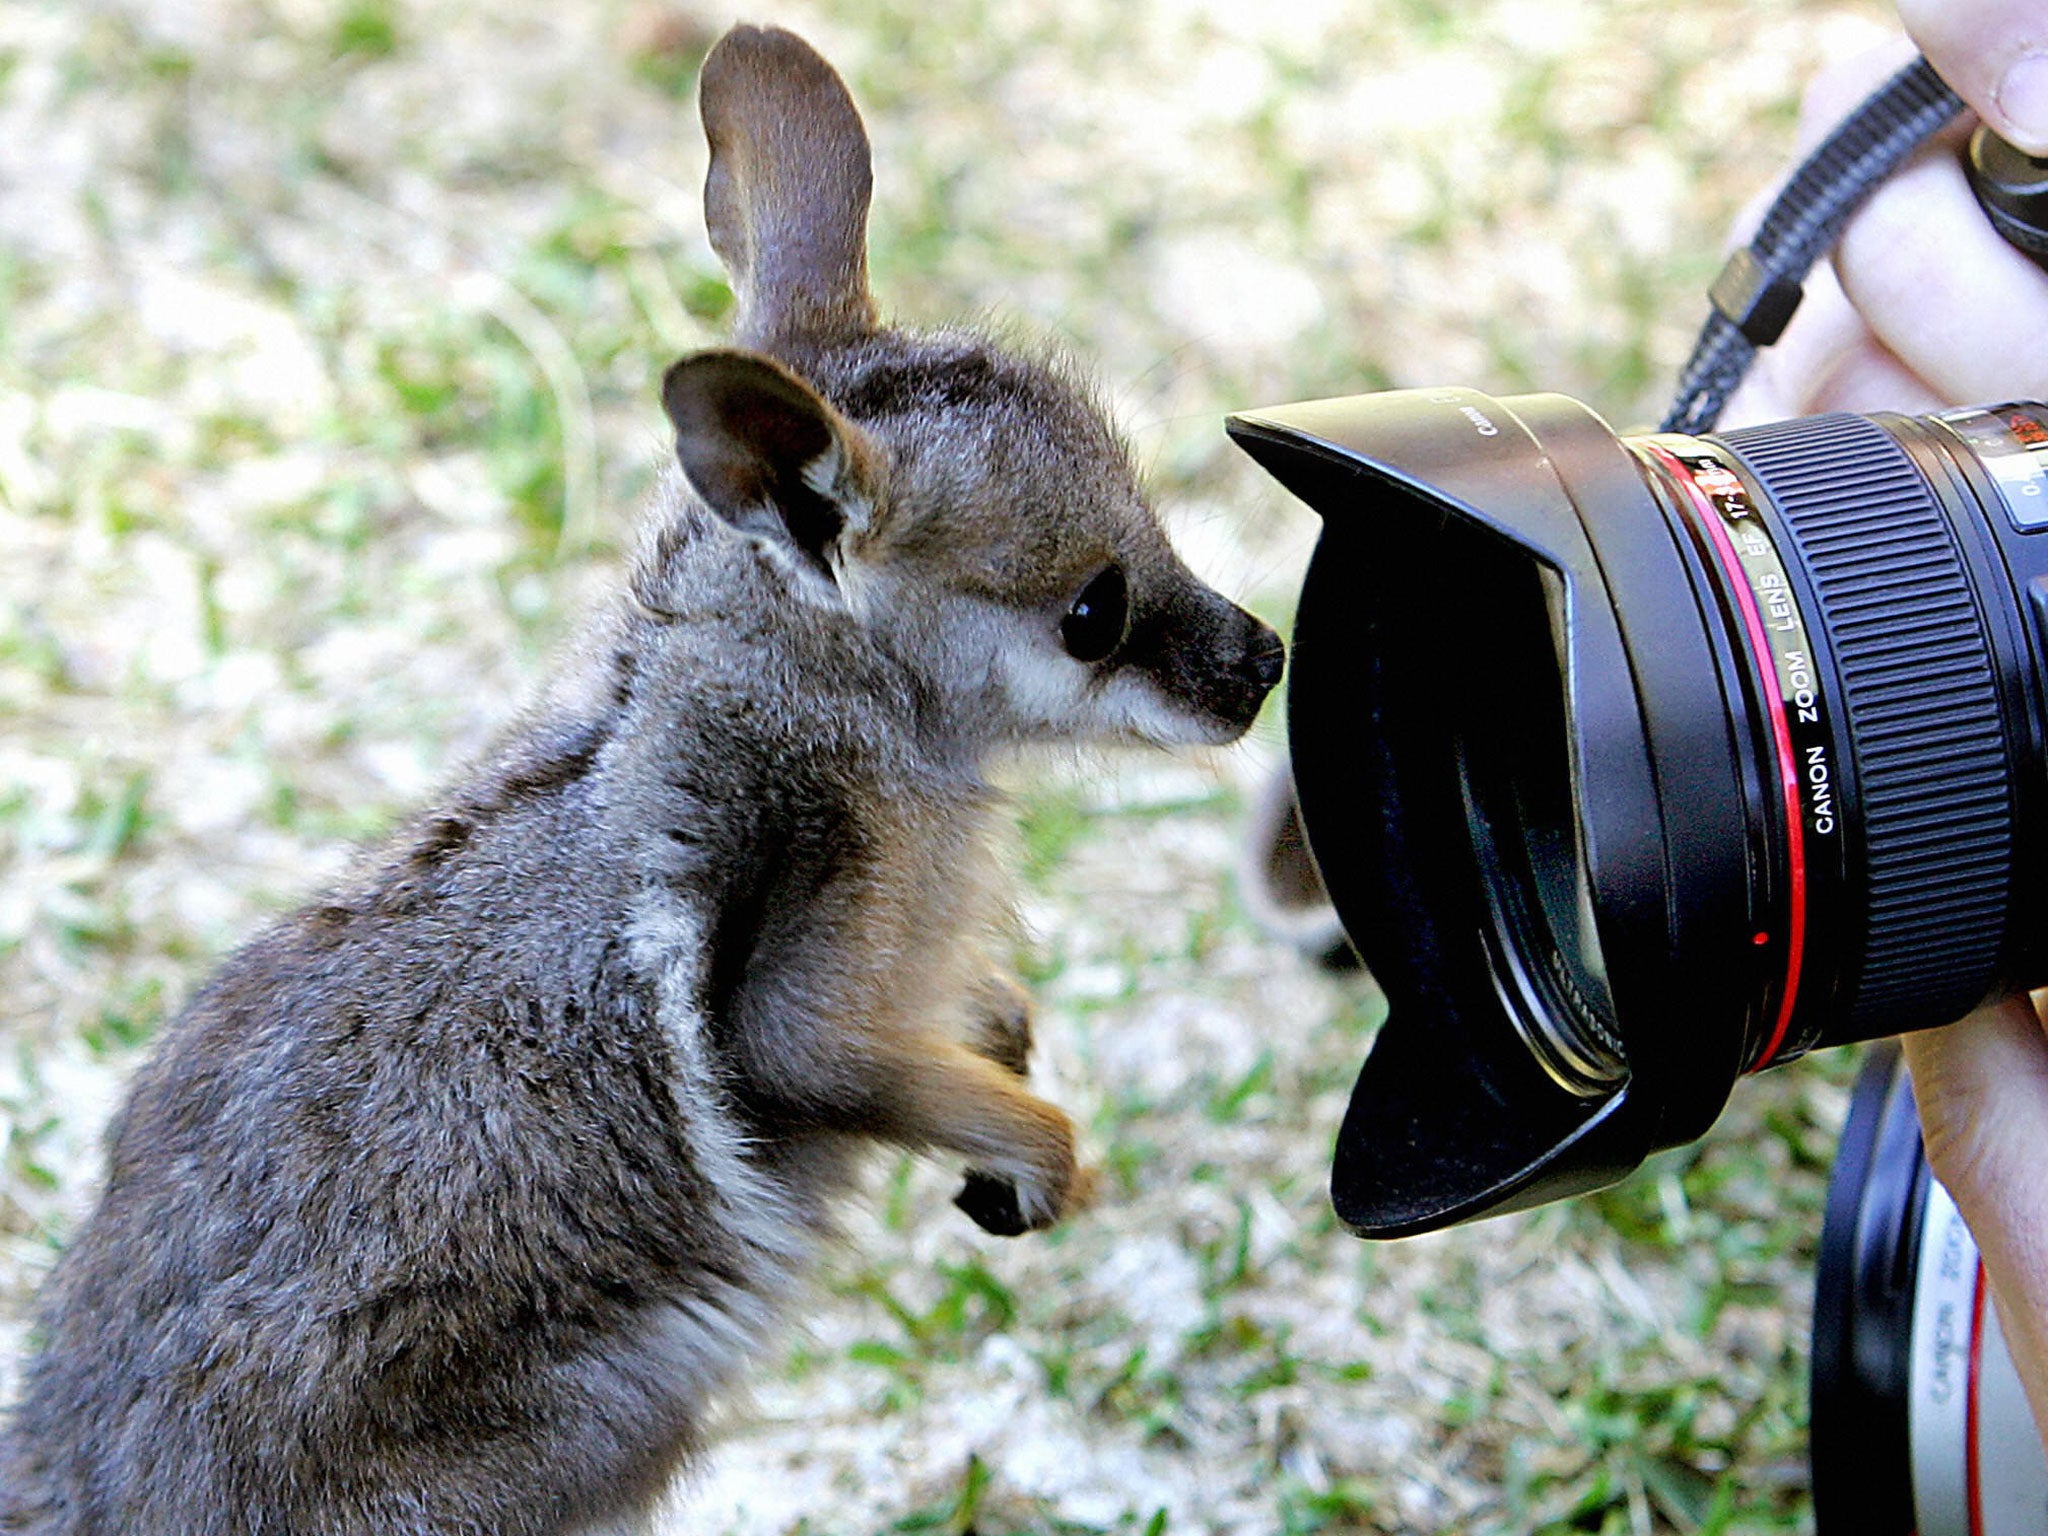 Hold that pose: A yellow-footed rock wallaby joey seems fascinated by the lens